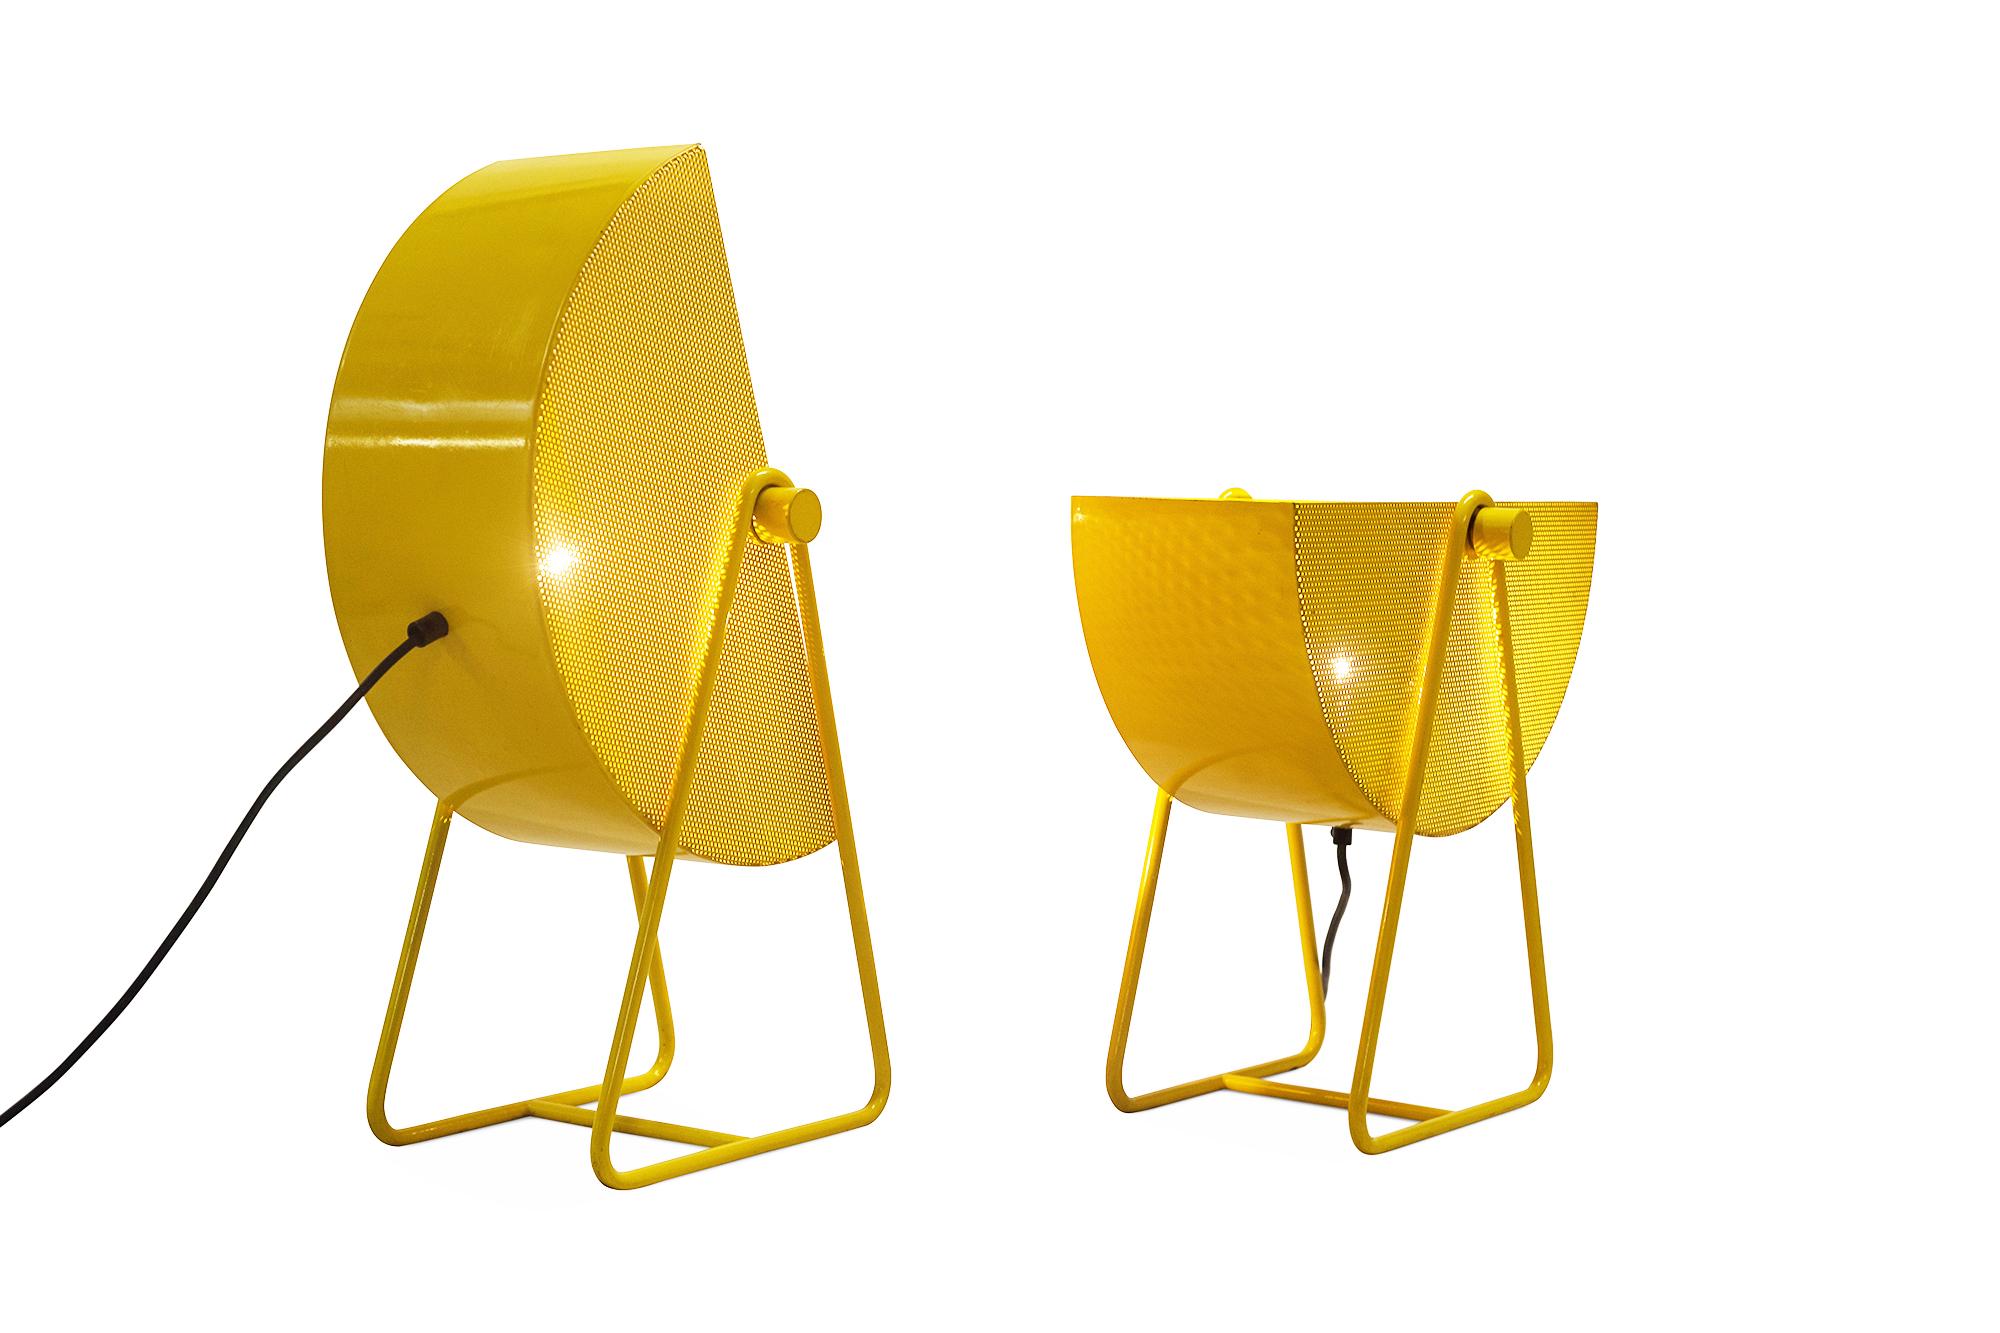 Italian Bieffeplast Yellow Table Lamps with Adjustable Shades, 1970s